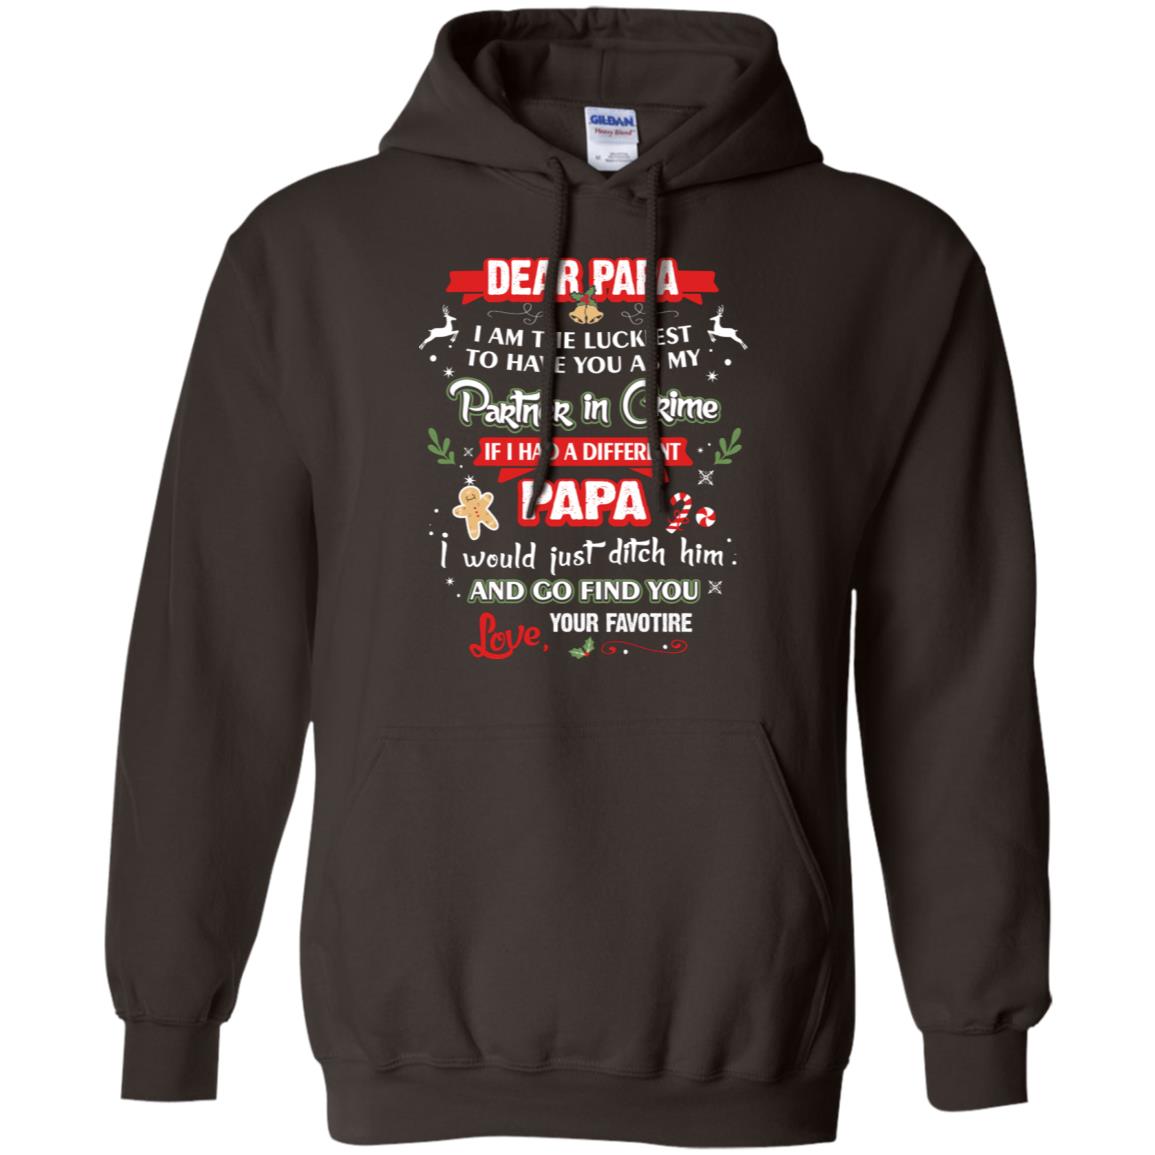 Dear Papa, I Am The Luckiest To Have You As My Partner In Crime If I Had A Different Papai Would Just Ditch He And Go Find You Love Your FavoriteG185 Gildan Pullover Hoodie 8 oz.